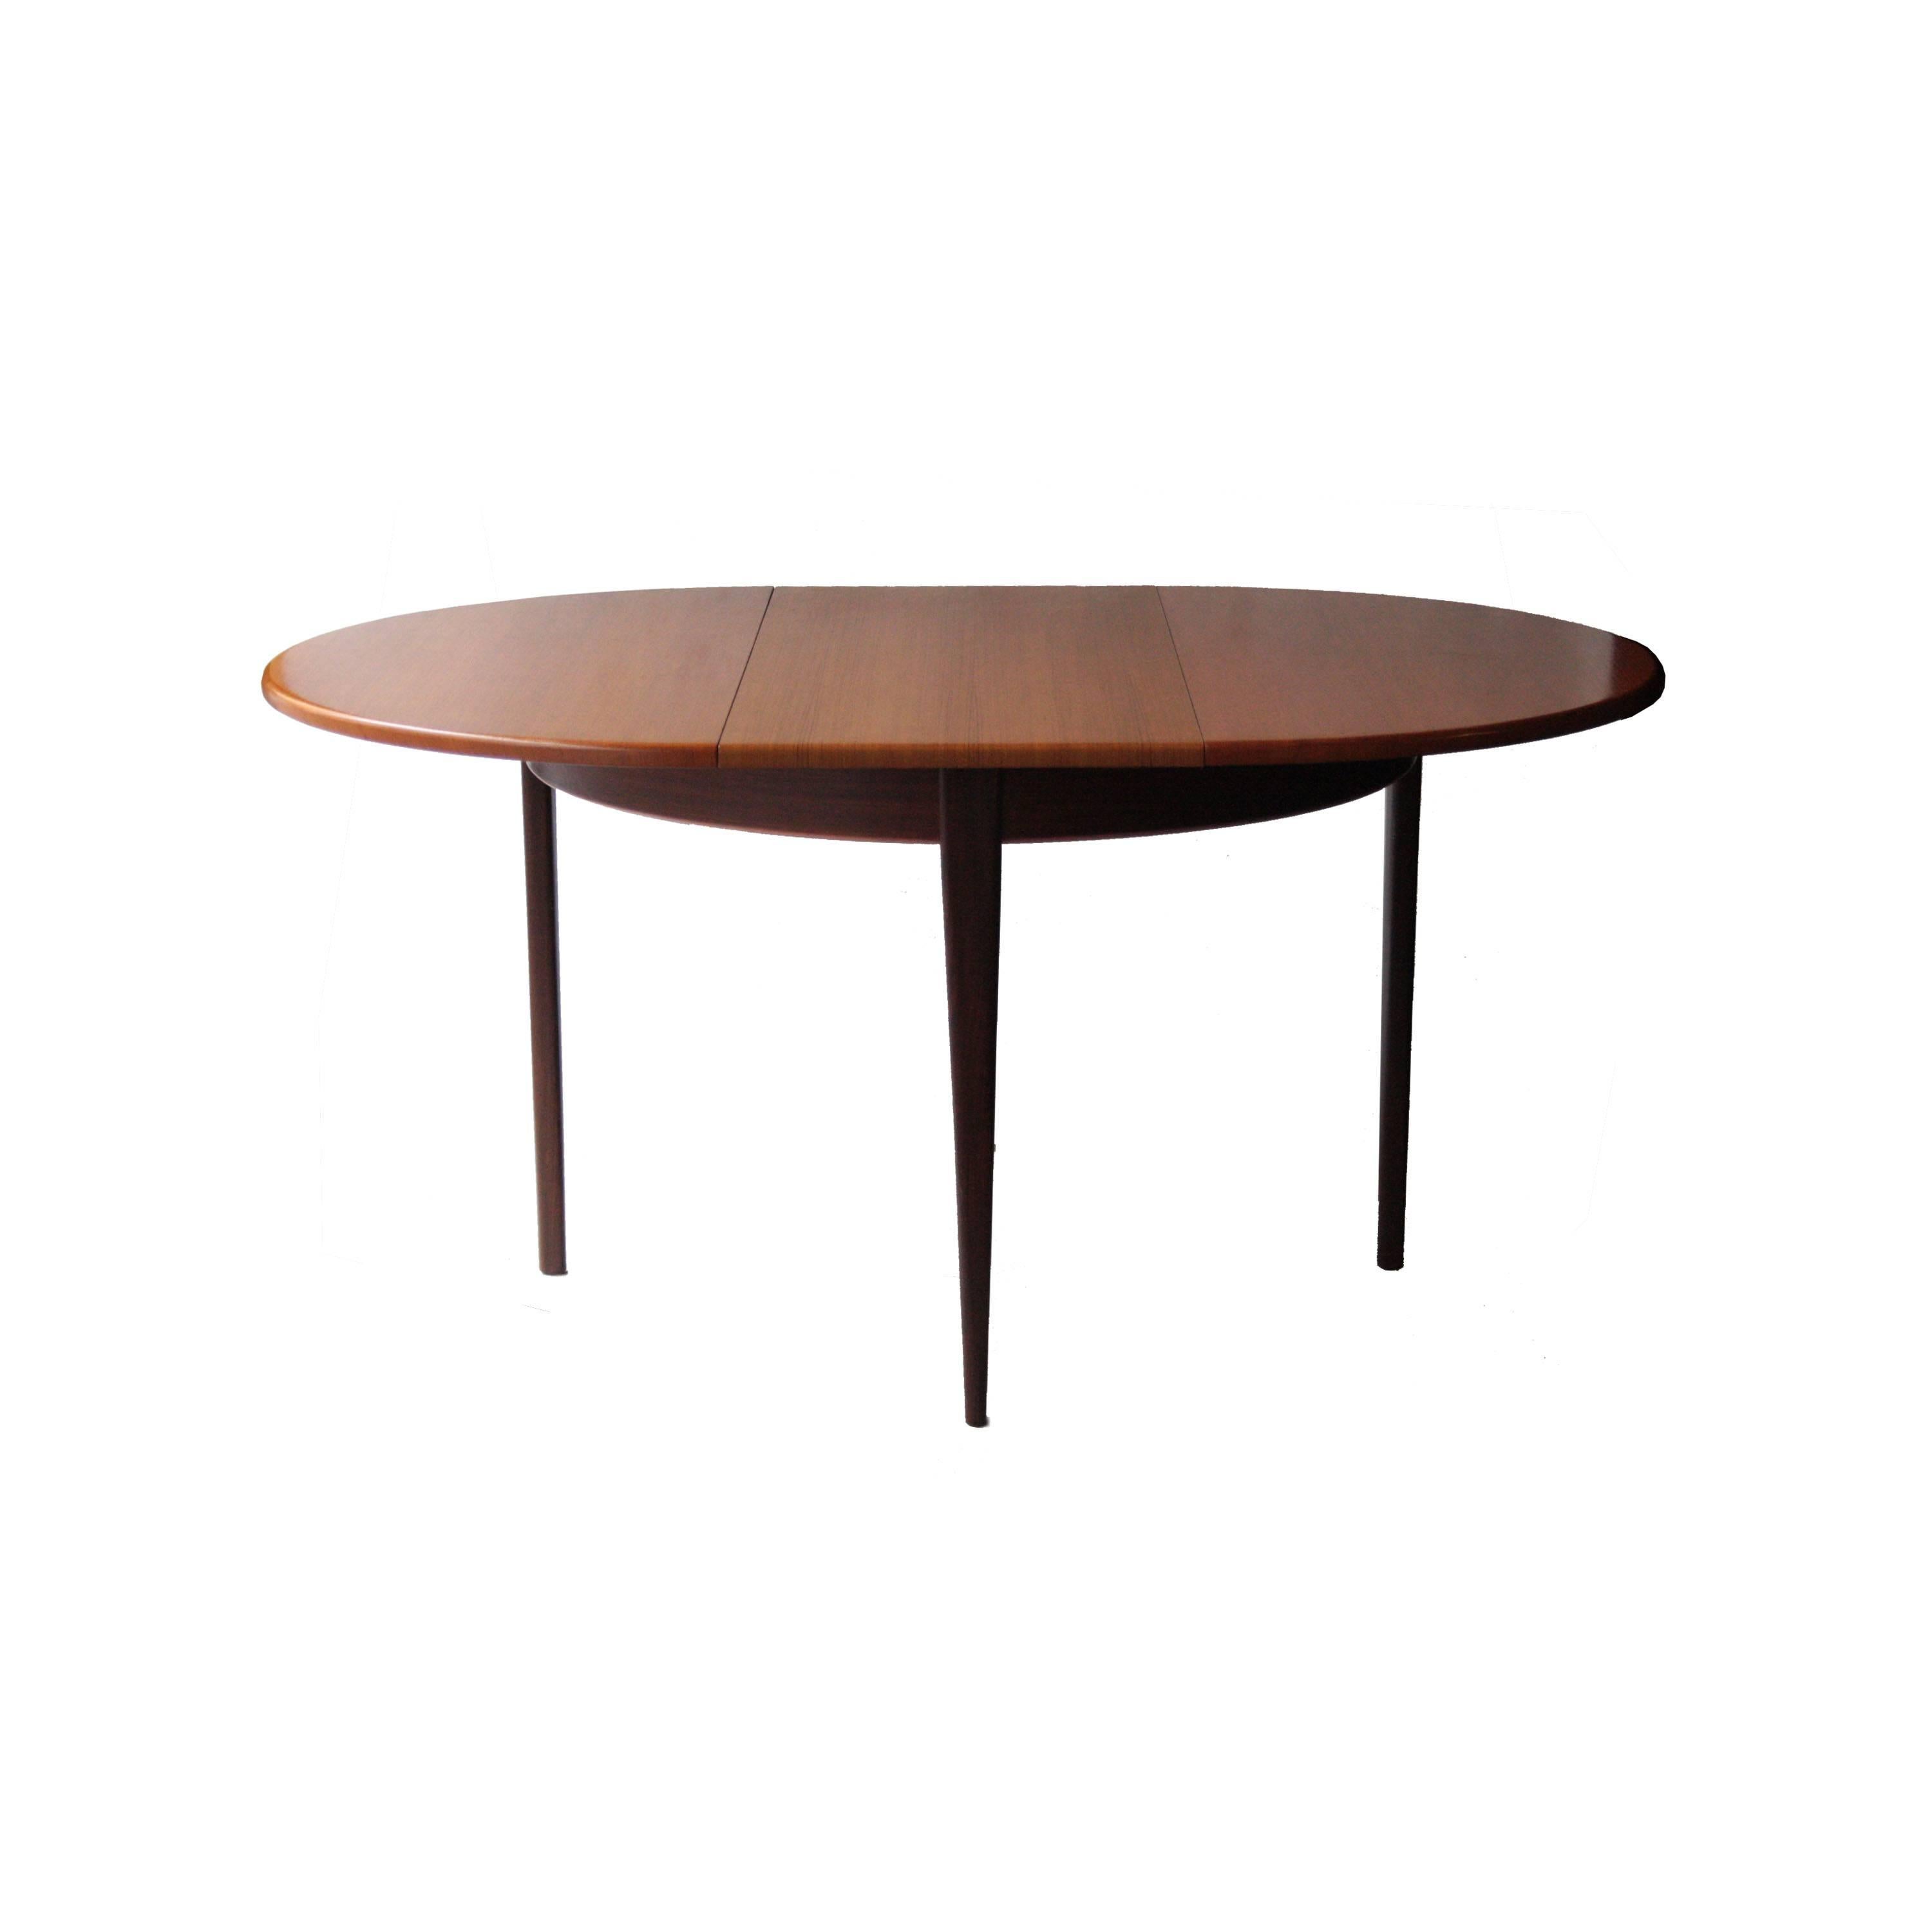 Round dining table in Mahogany, extendable 50cm.